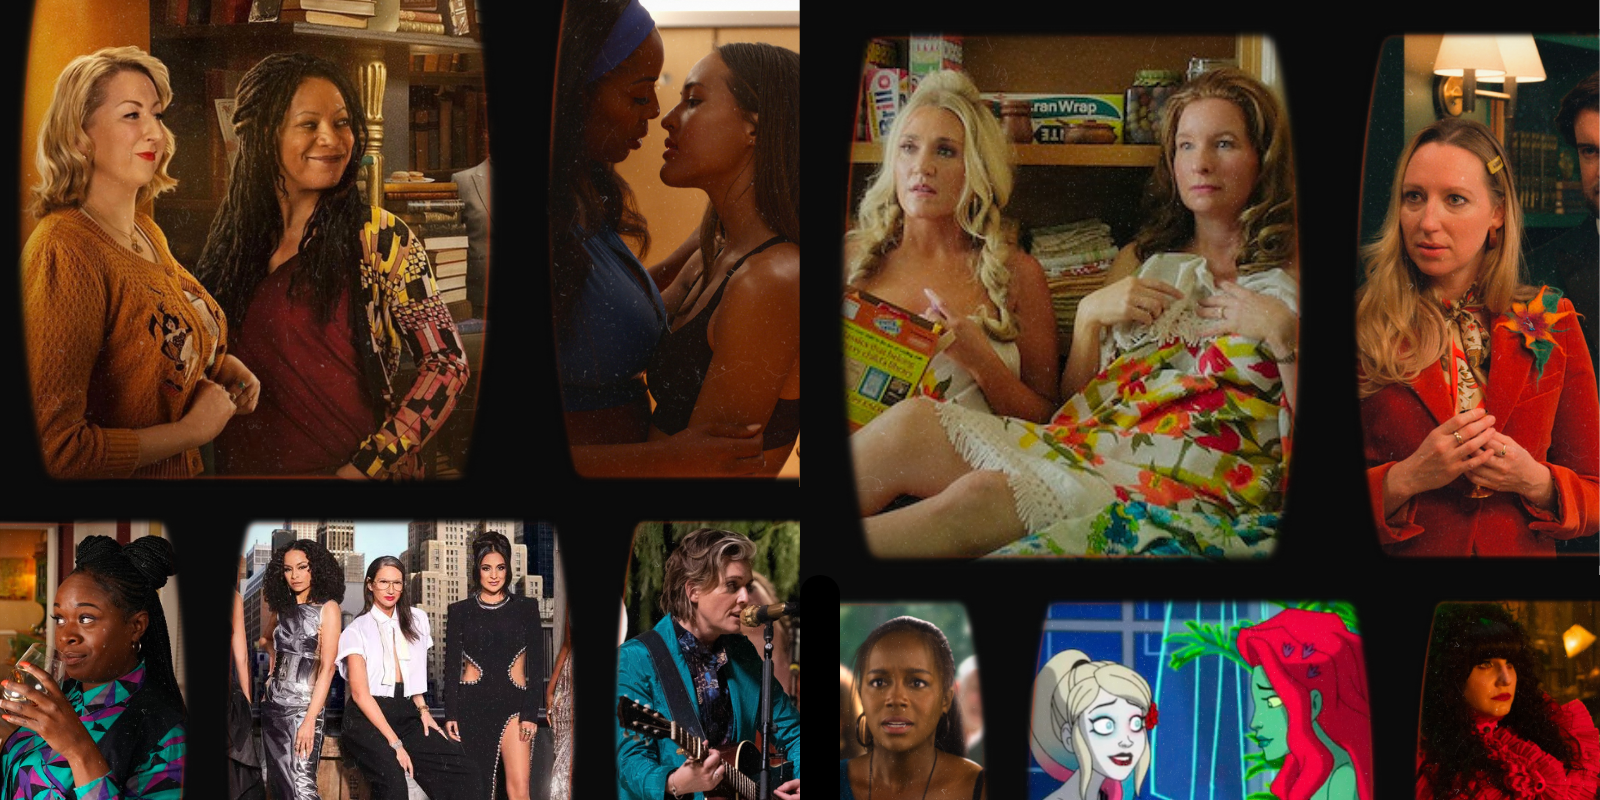 july 2023 streaming guide collage: Good Omens, Survival of the Thickest, Minx, The Afterparty. Bottom row: A Little White Lie, Real Housewives of New York, A Little White Lie, Brandi Carlile, The Donor Party, Harley Quinn, What We Do In the Shadows